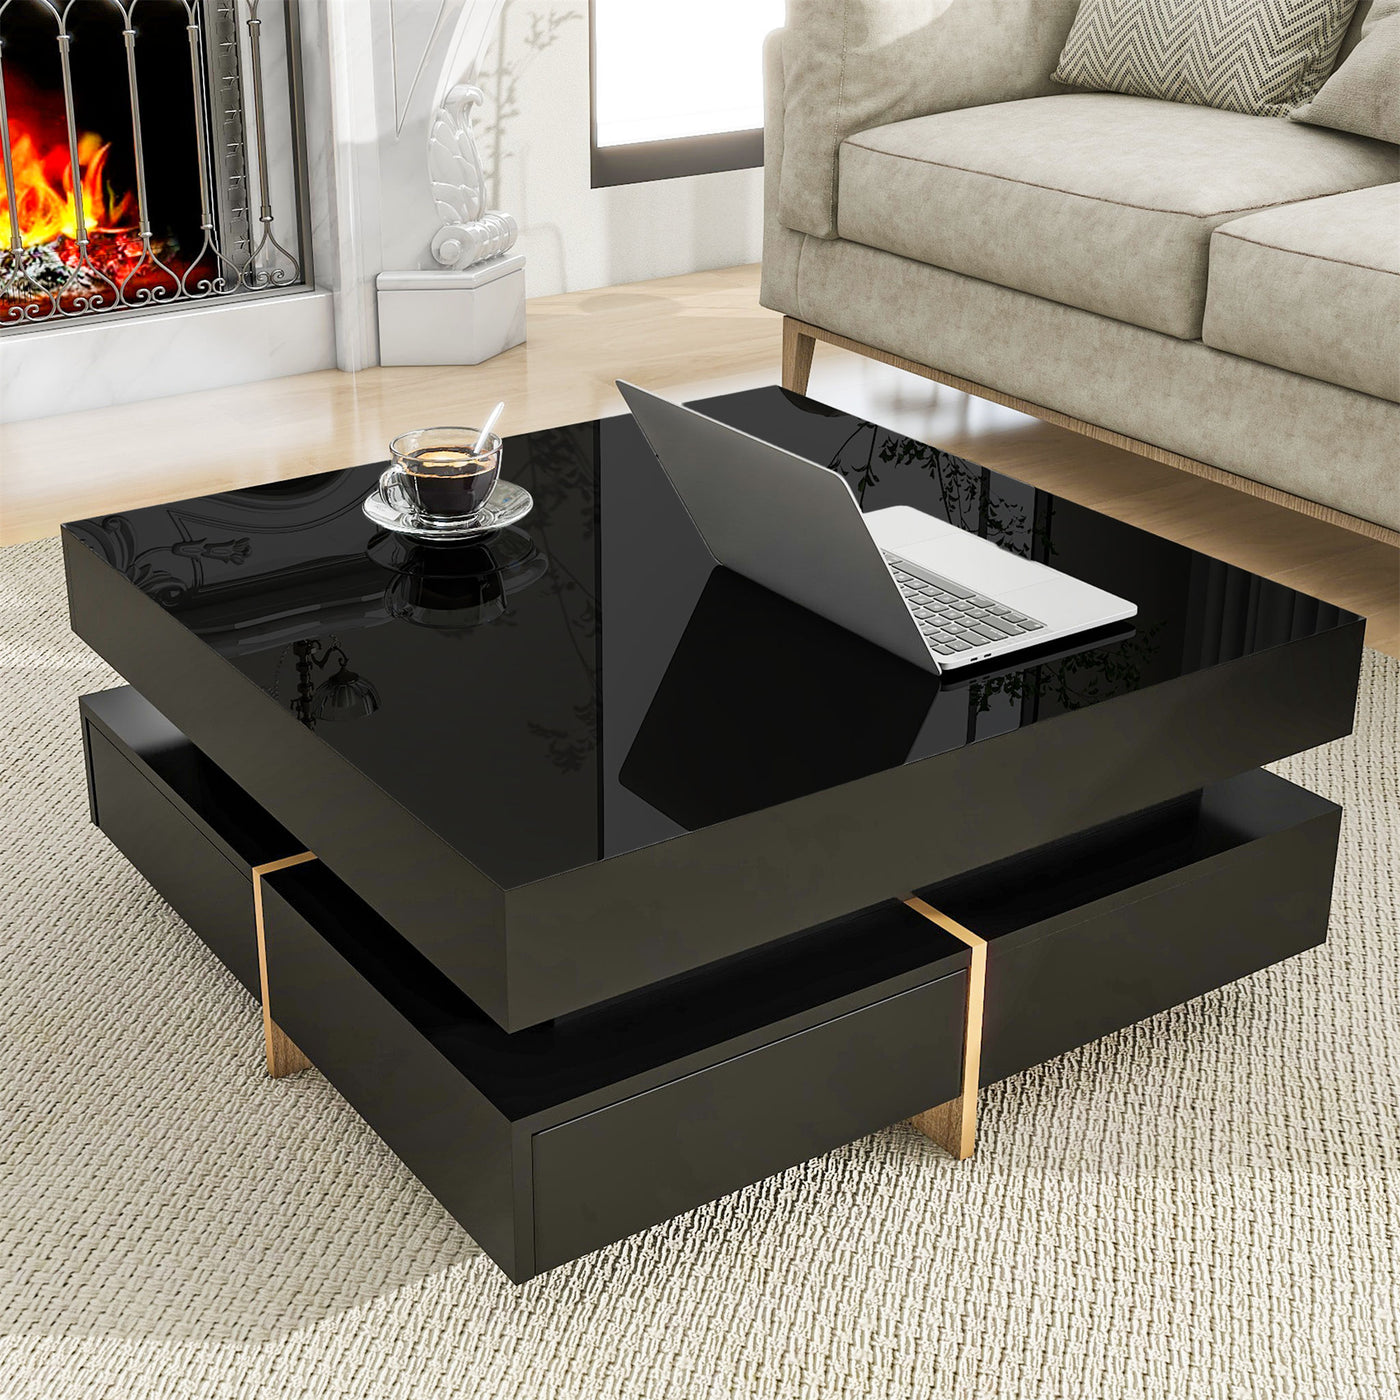 Logicfox Coffee Table With Drawers